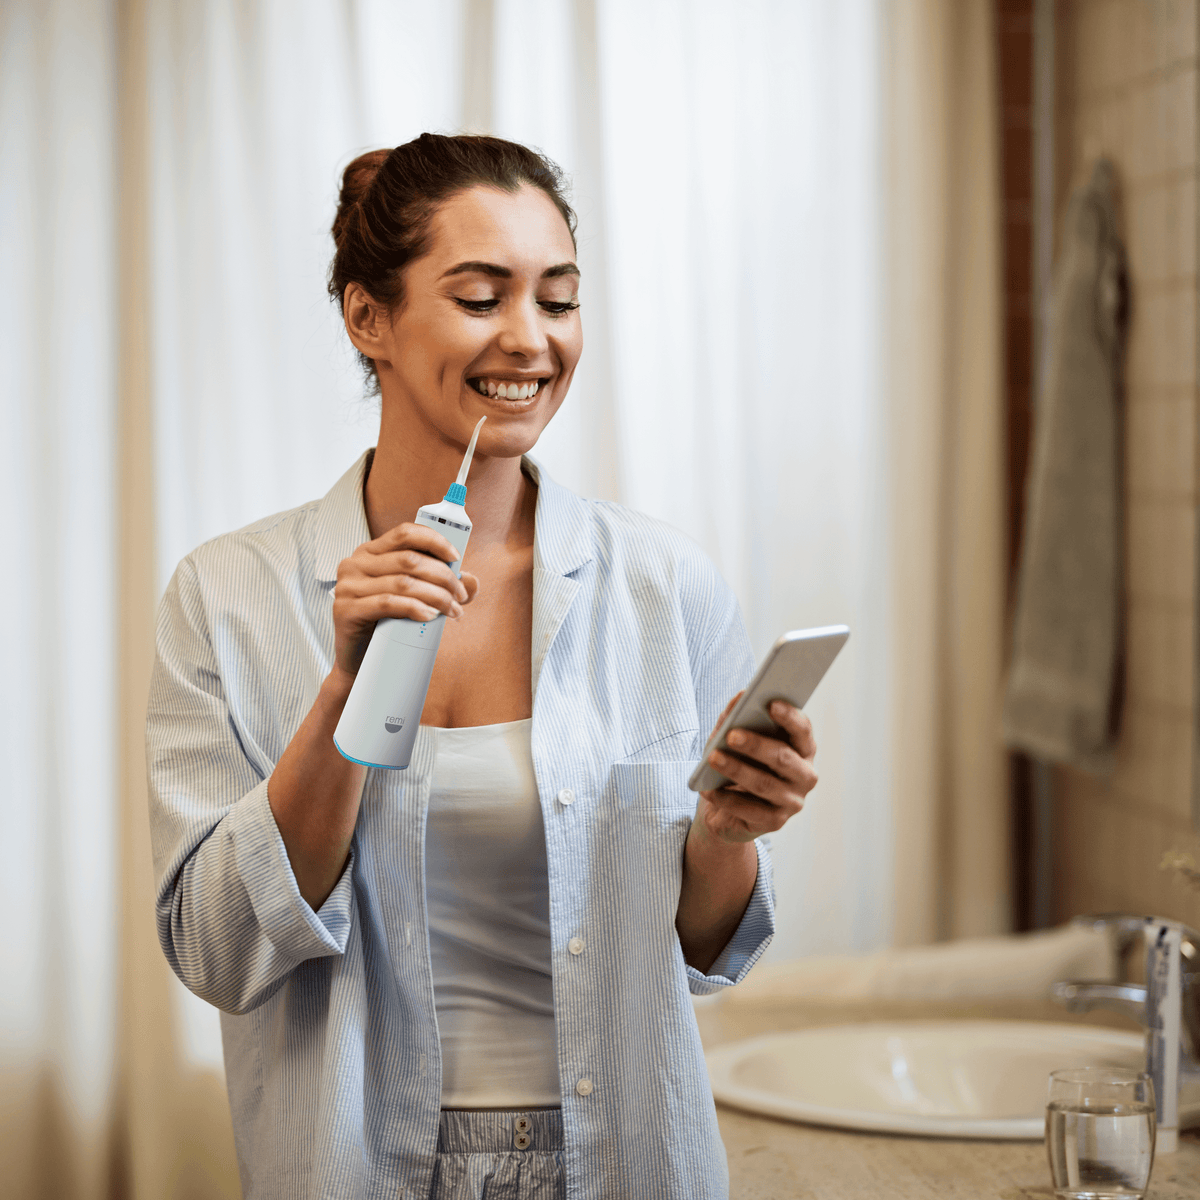 A woman smiles while holding a Waterpik Water Flosser and looking at her smartphone in the bathroom.